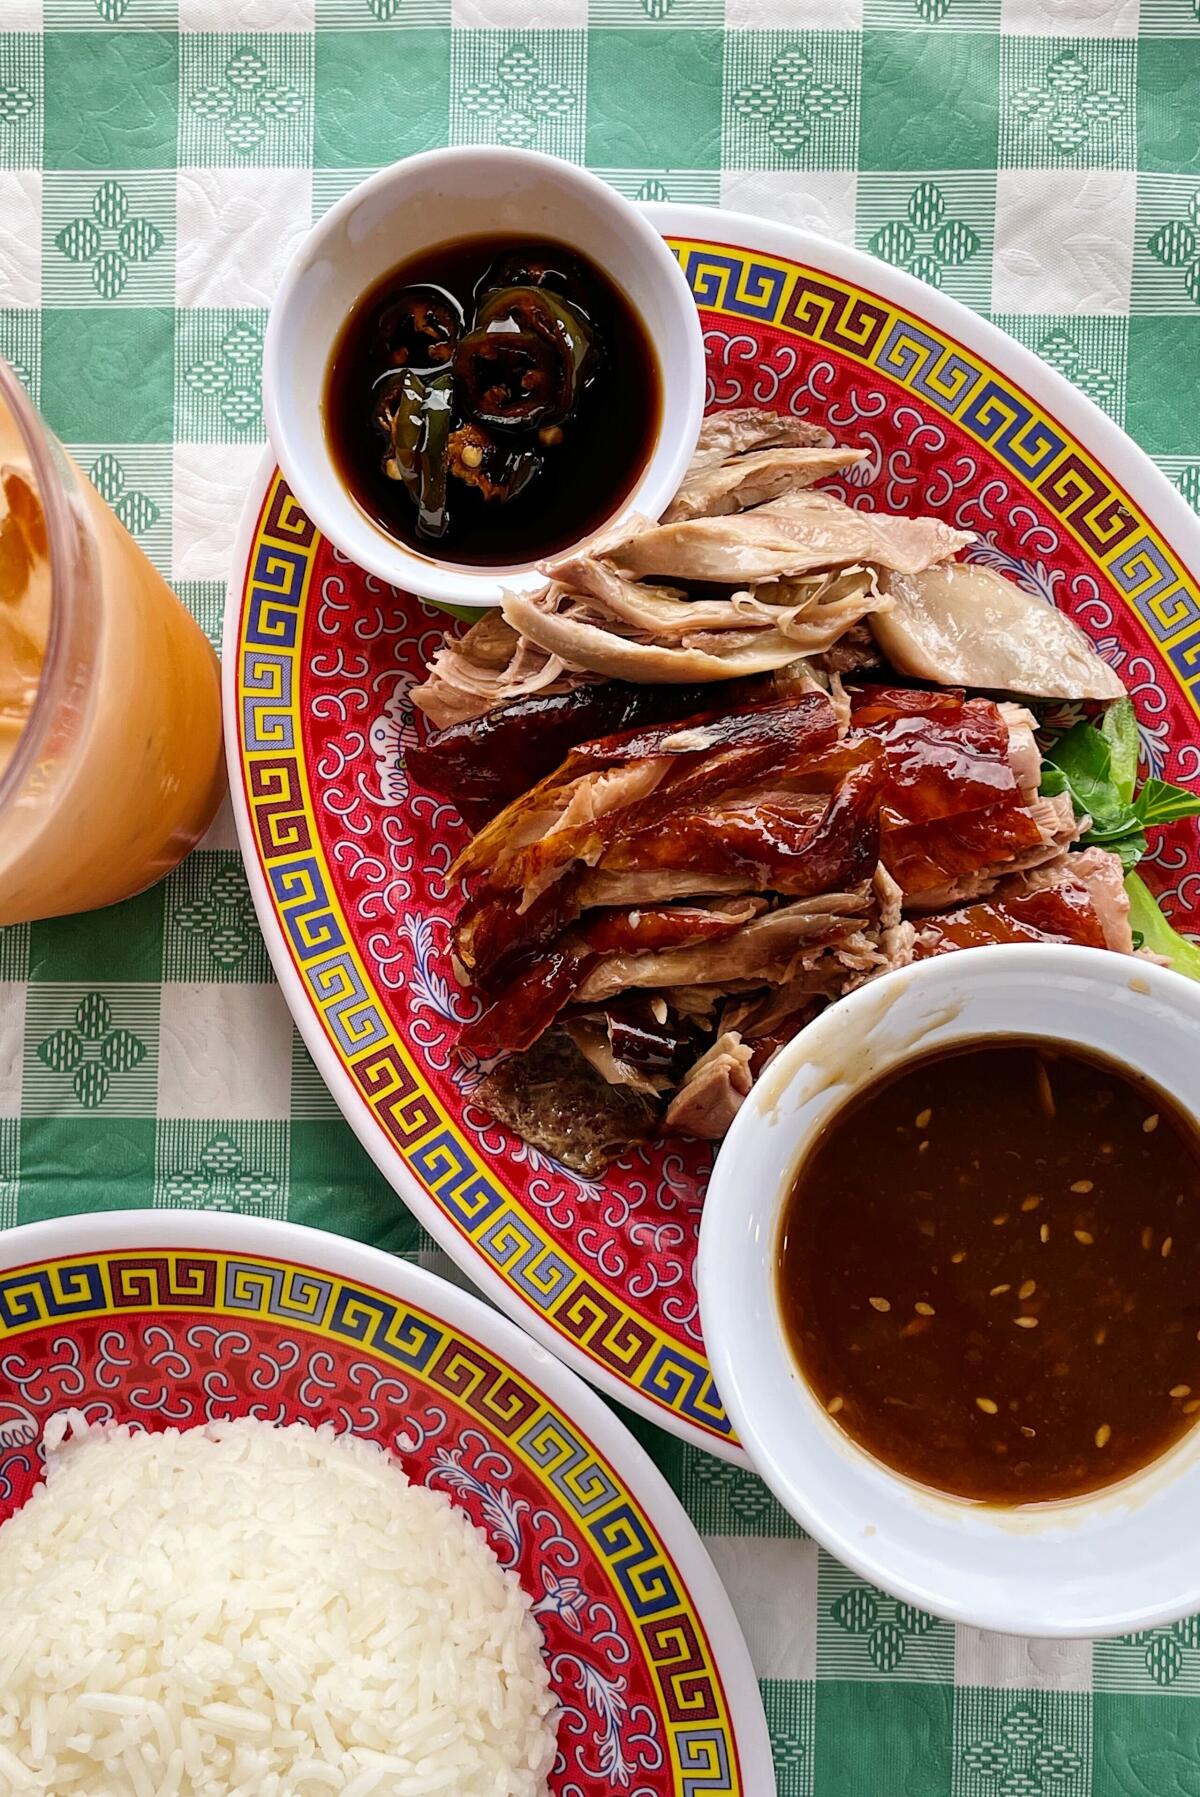 A plate of sliced roast duck with sauce and rice.